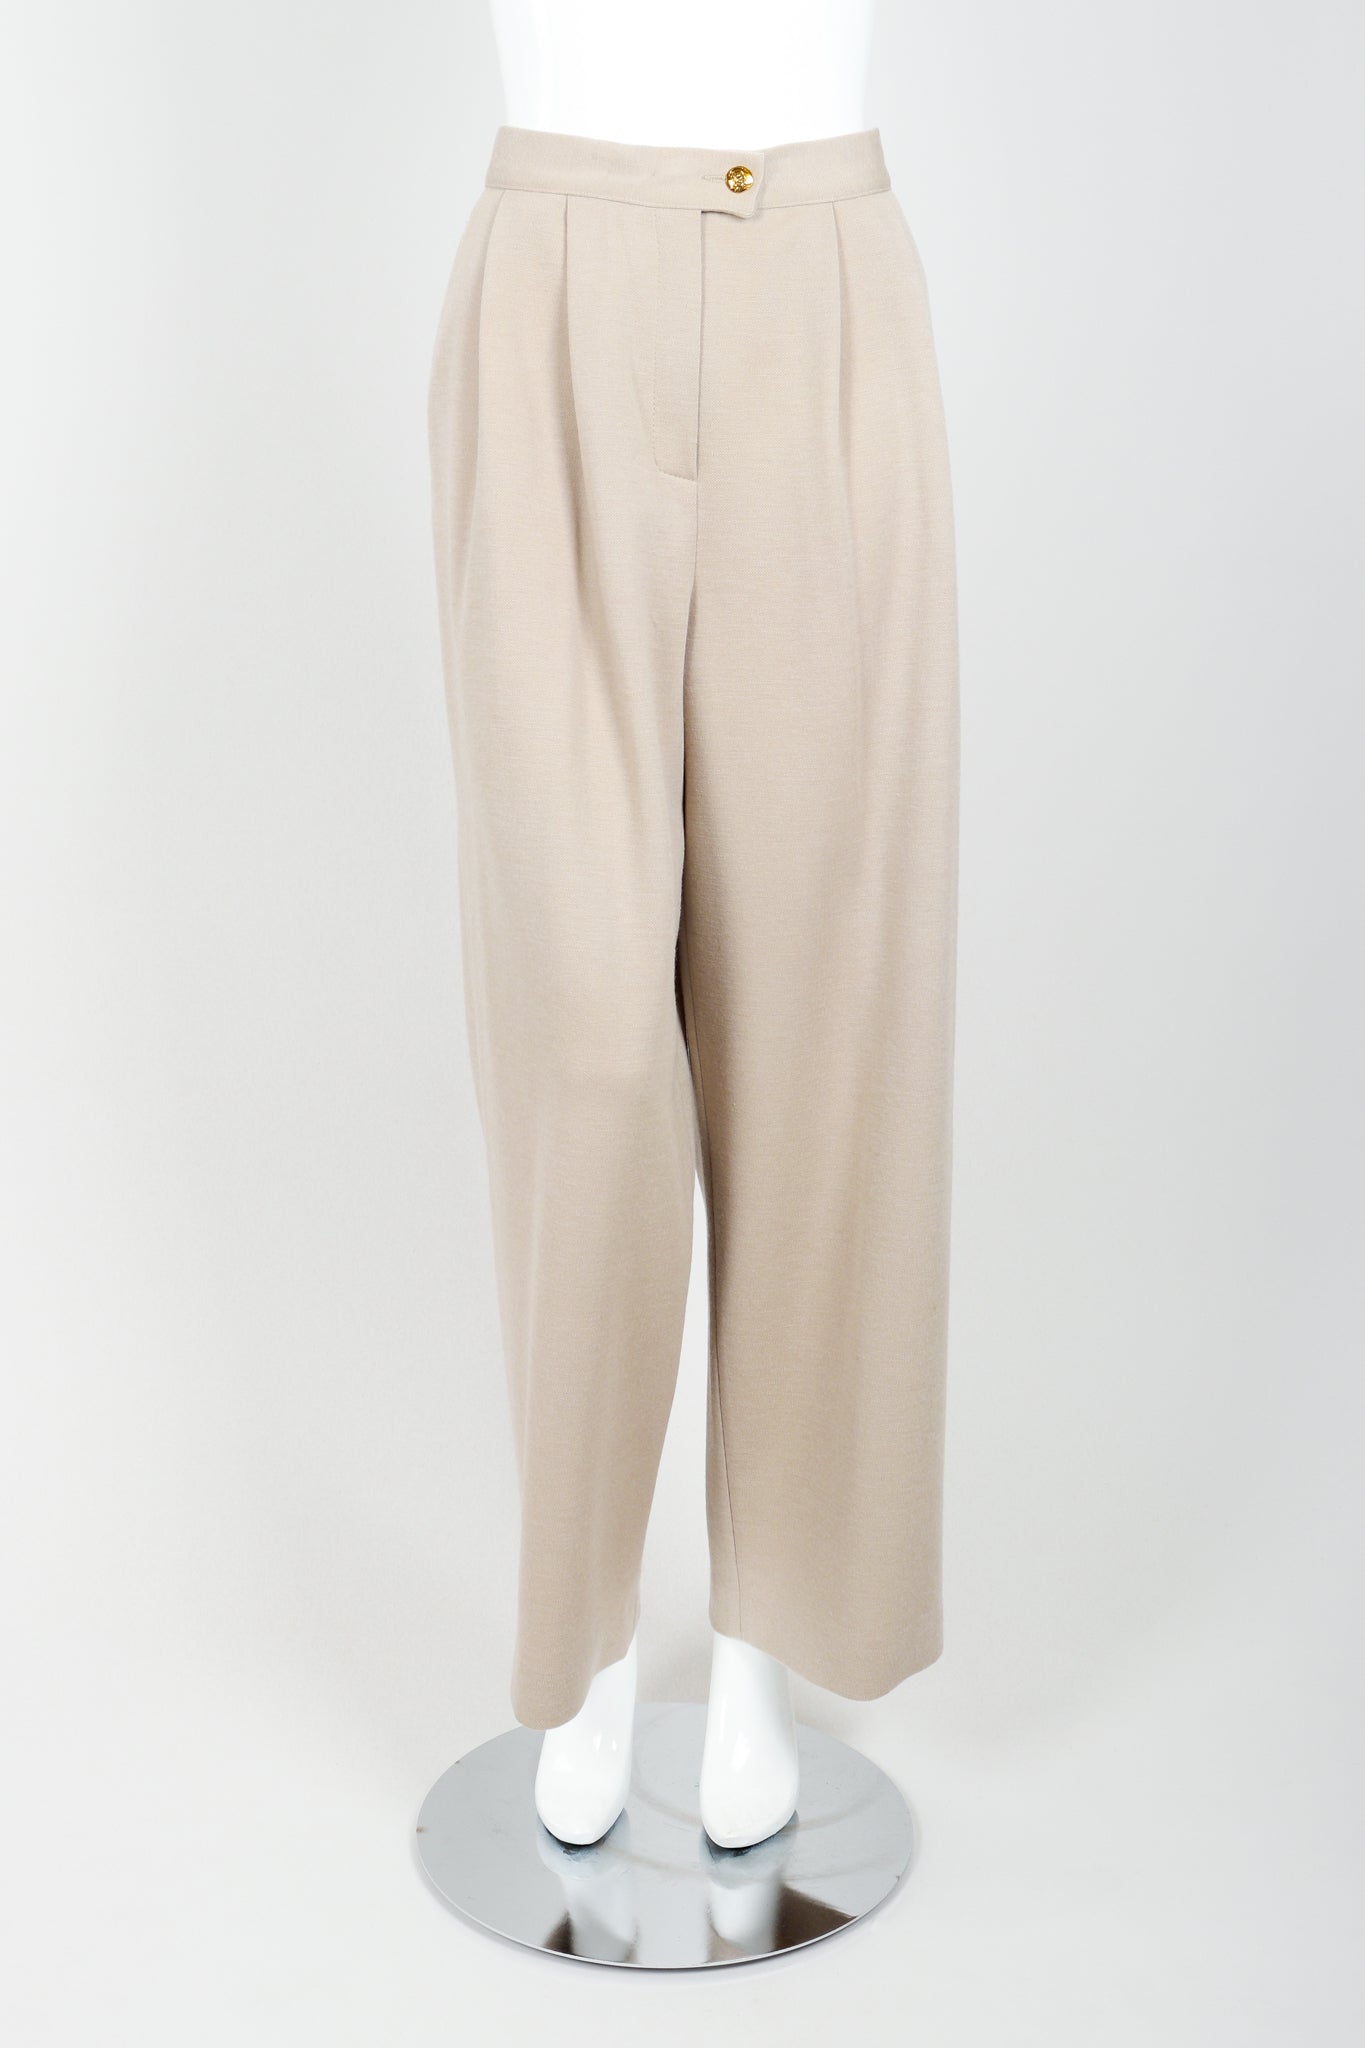 Vintage Sonia Rykiel Sand Beige Knit Pleated Pant on Mannequin front at Recess